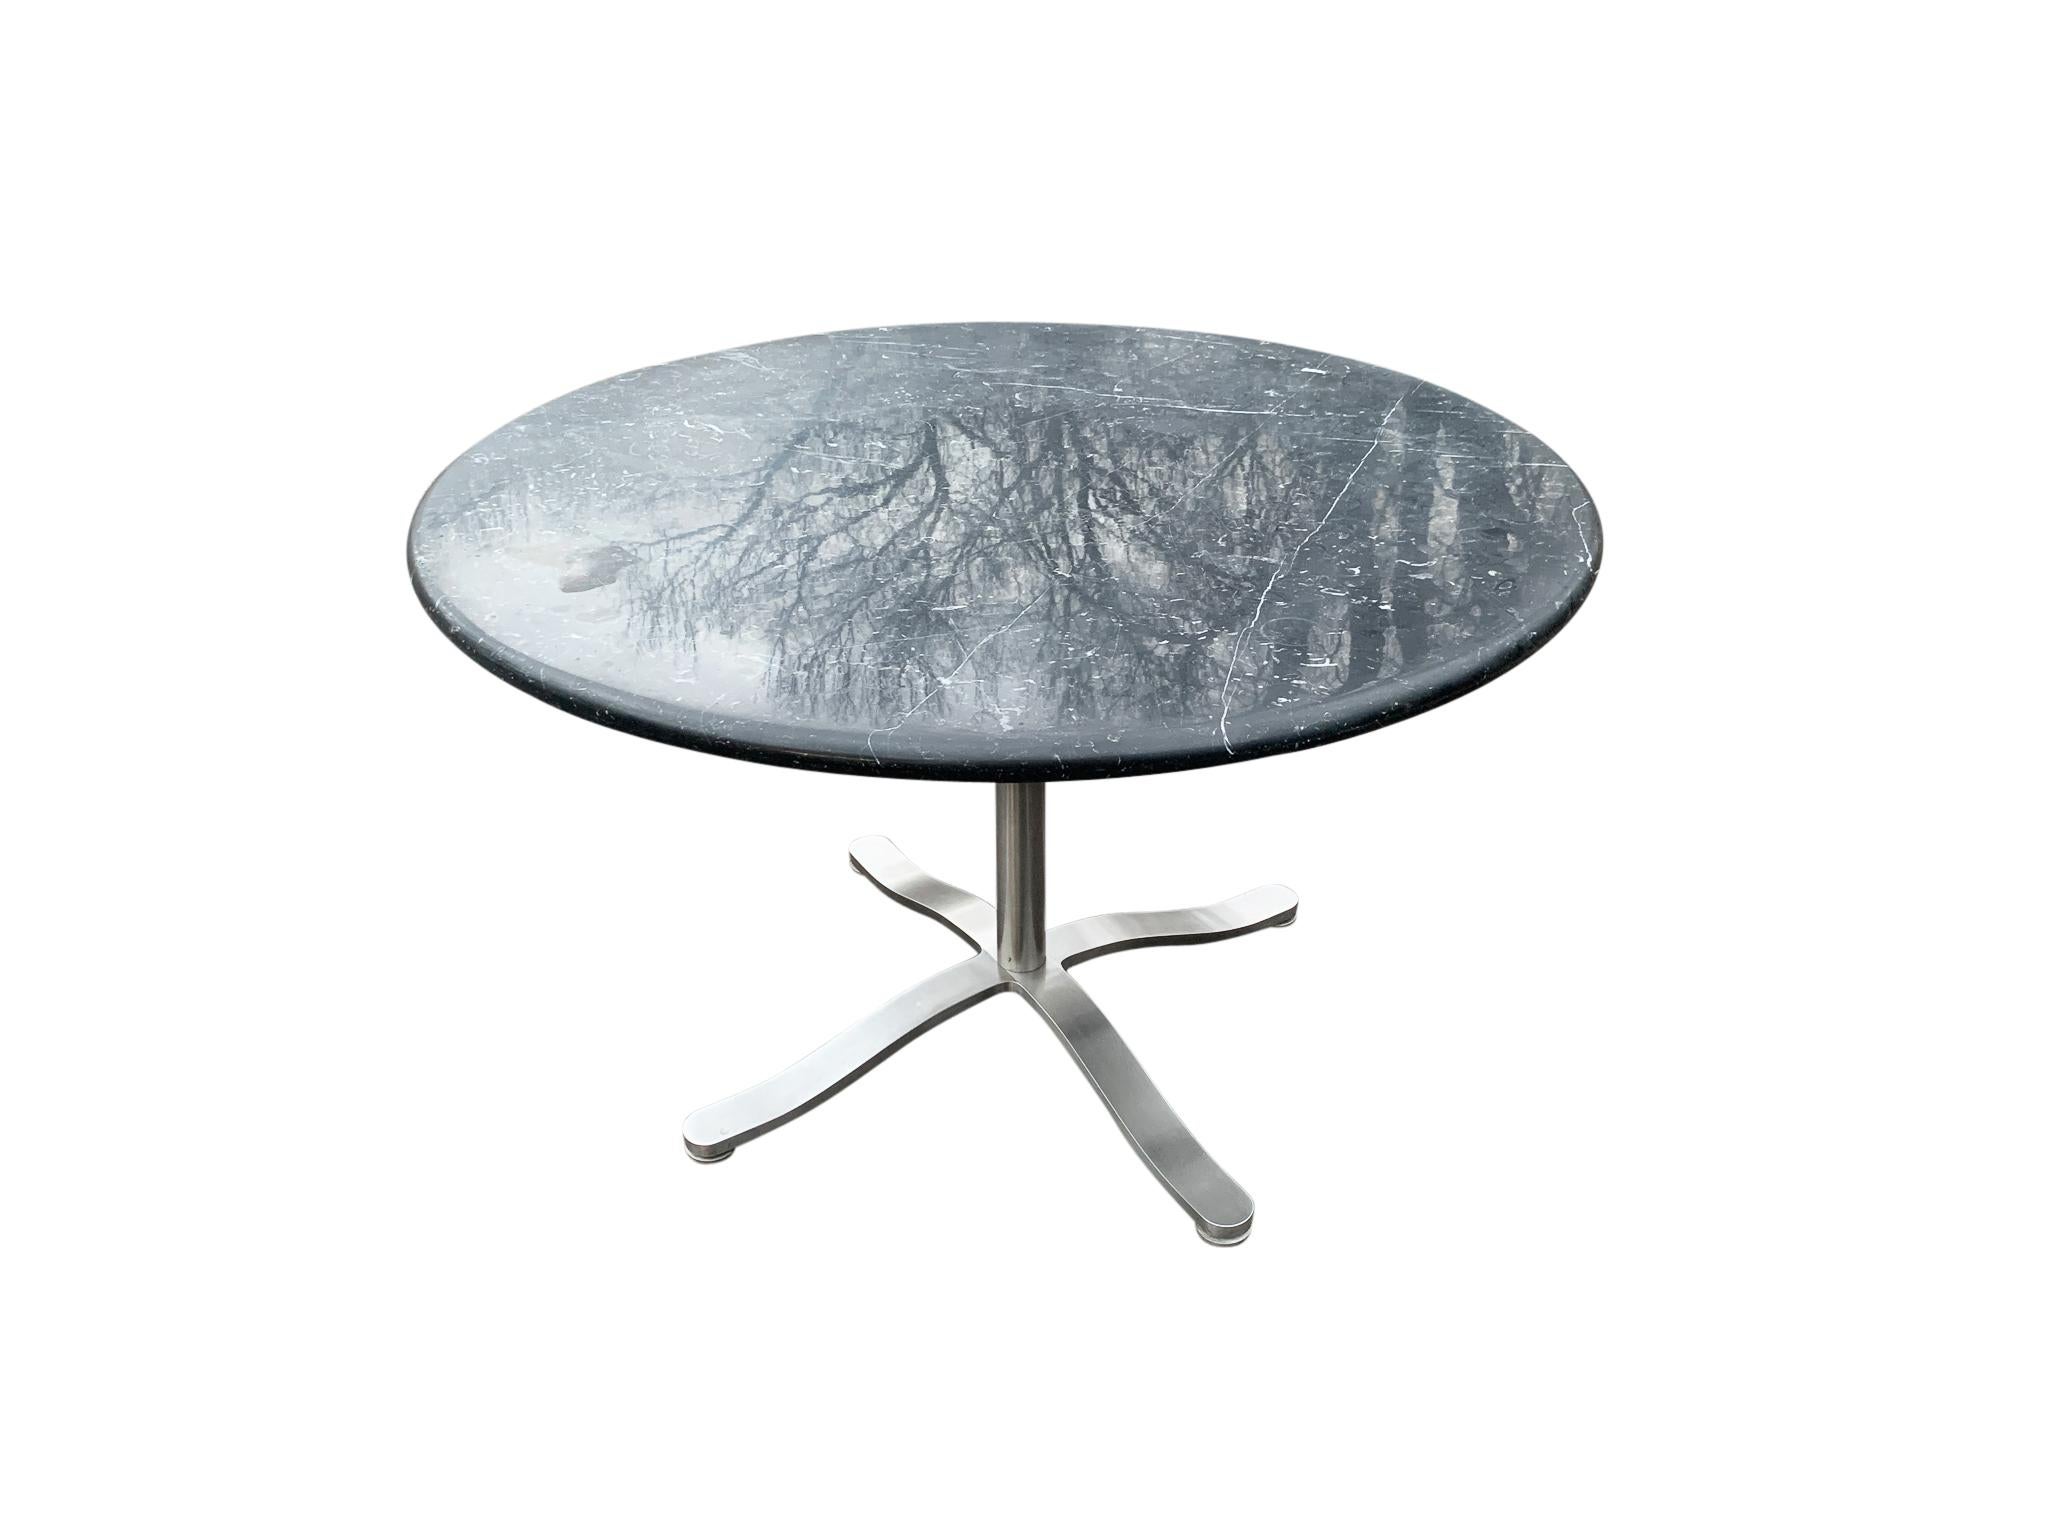 American Nicos Zographos Black & White Marble Round Dining Table Stainless Steel Base